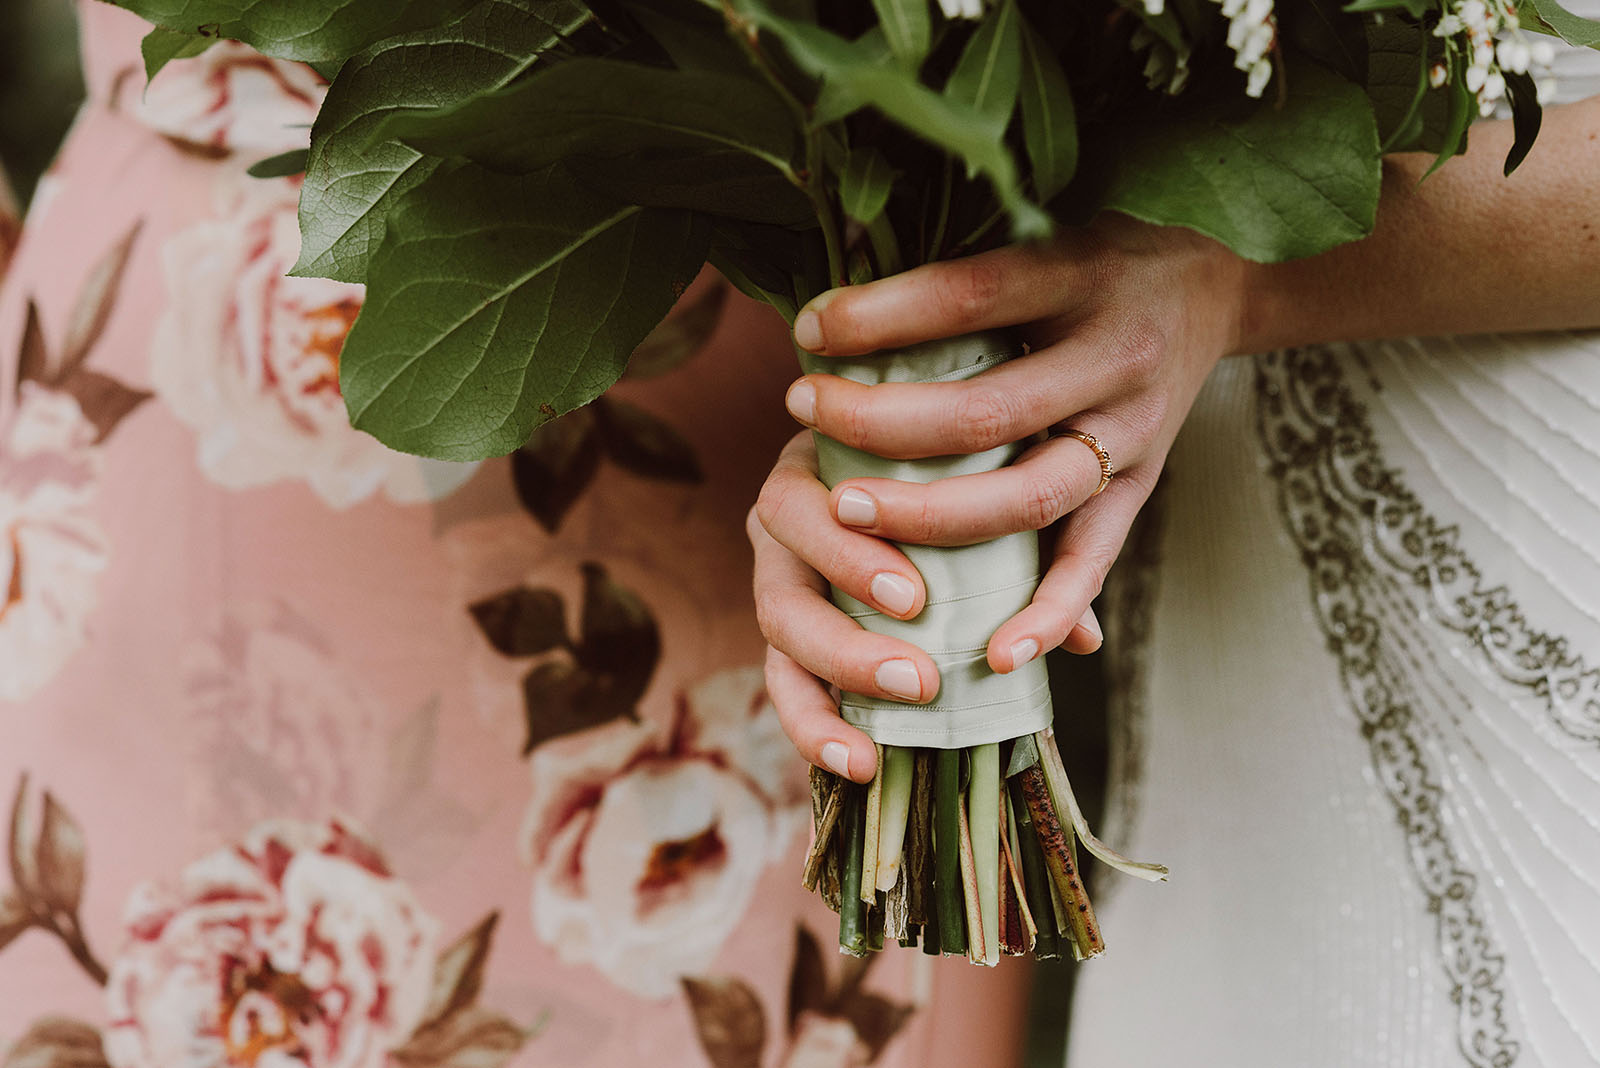 Portland Bridal Photography - Freshly manicured nails holding a bouquet